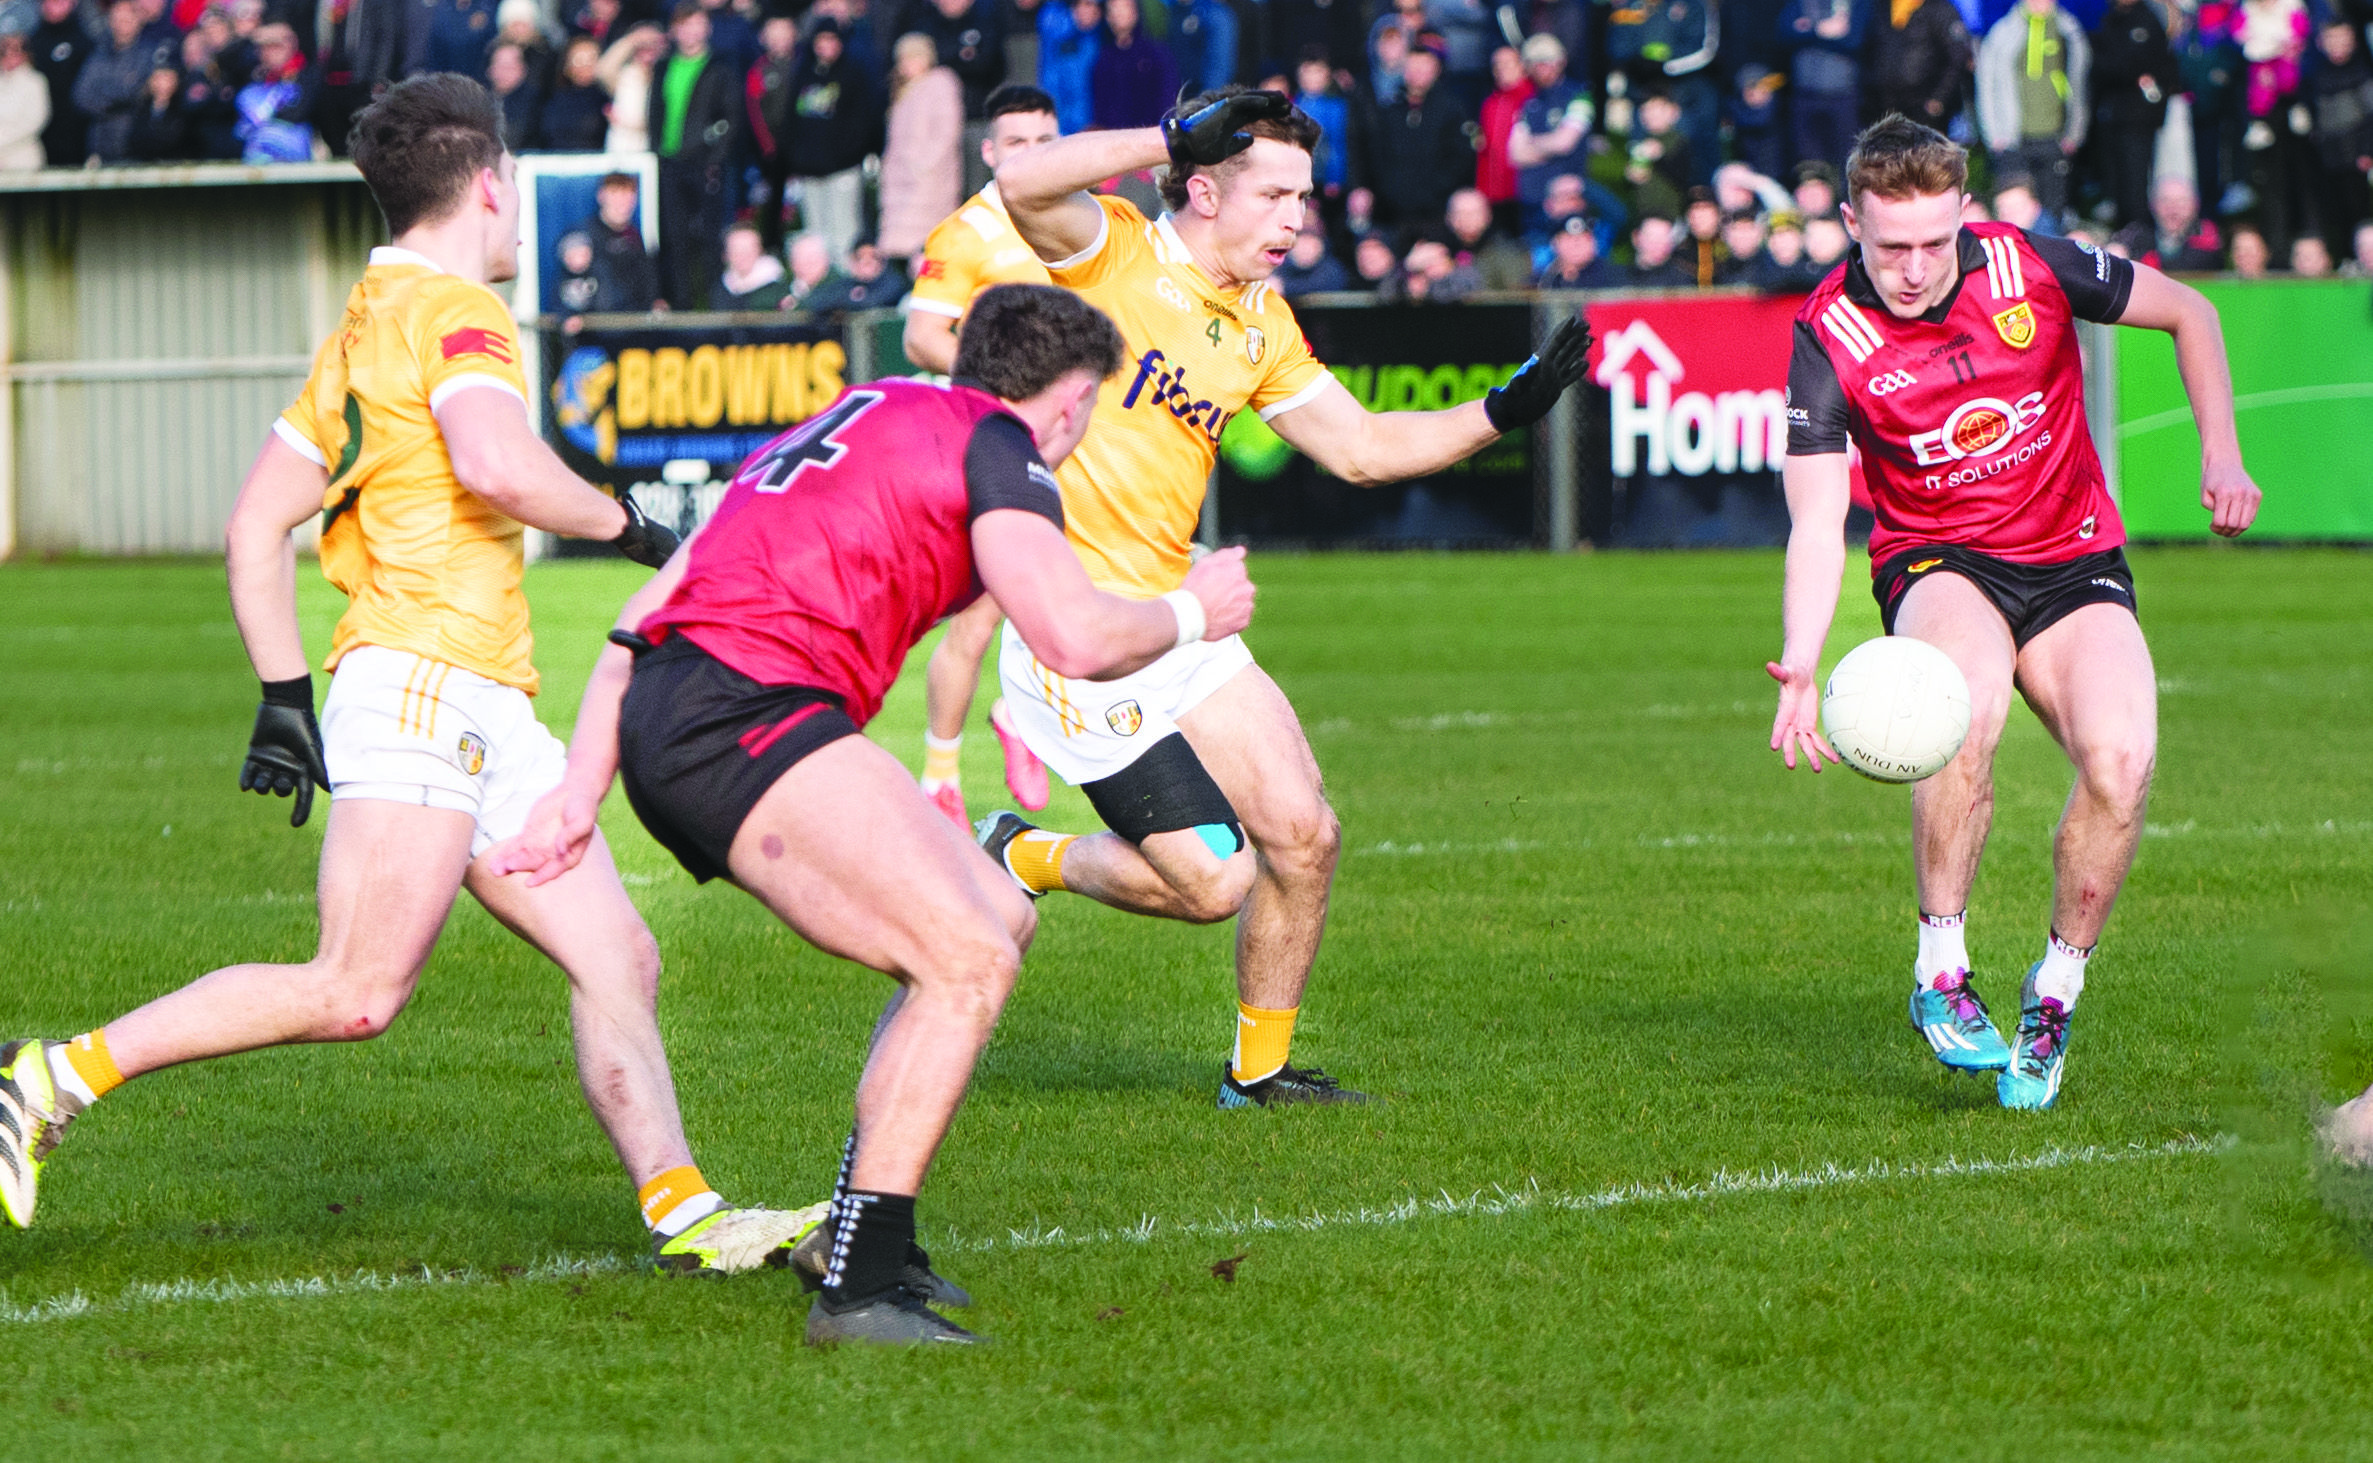 Down proved too strong when they sides met at Corrigan Park in February, but this weekend in Newry may be a different type of game with Antrim’s injury list not quite as severe